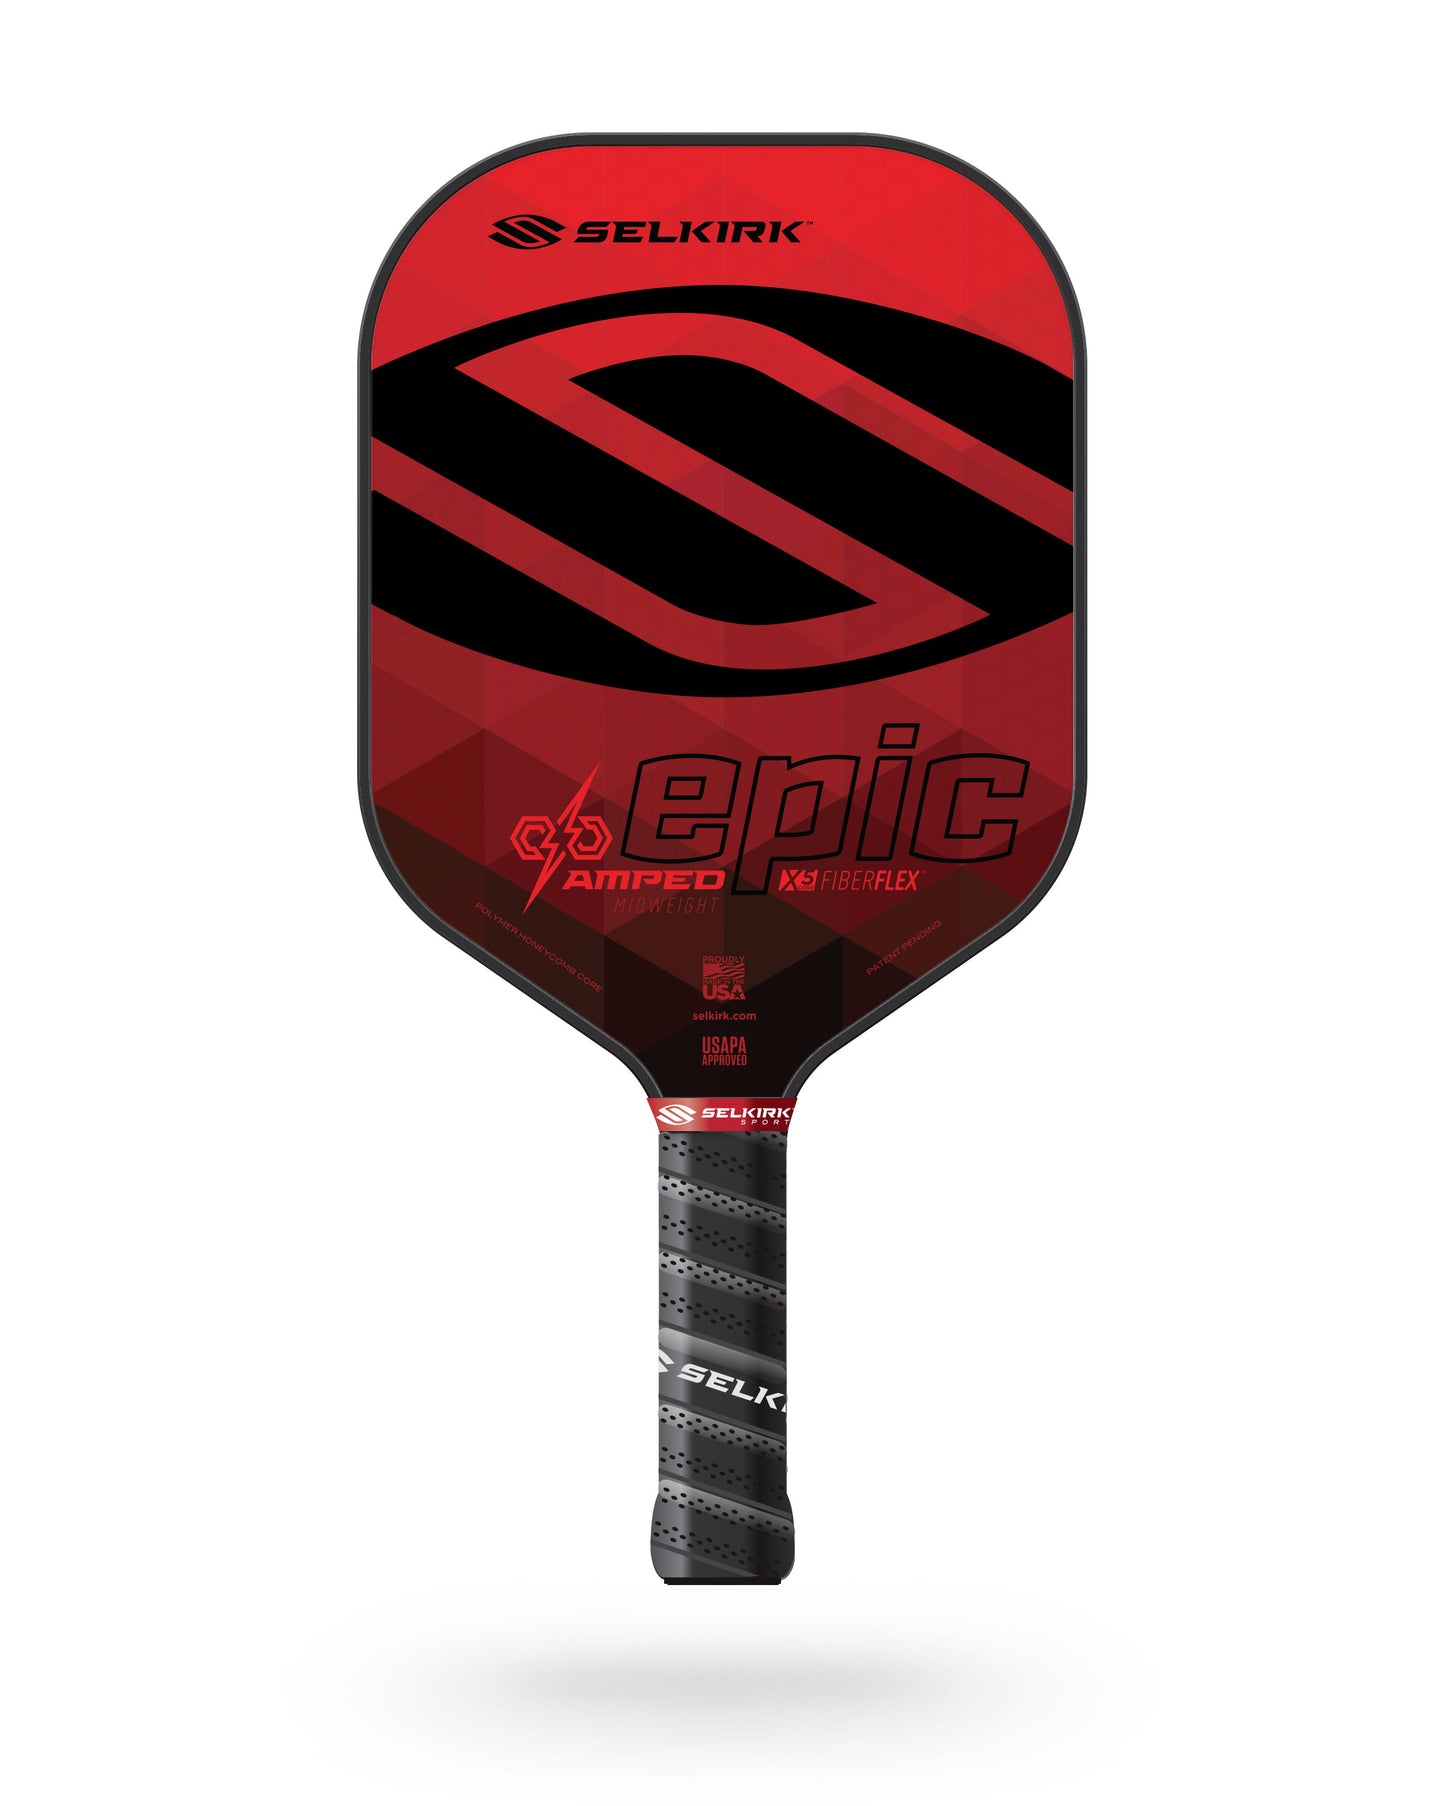 Selkirk AMPED Epic pickleball paddle in red and black